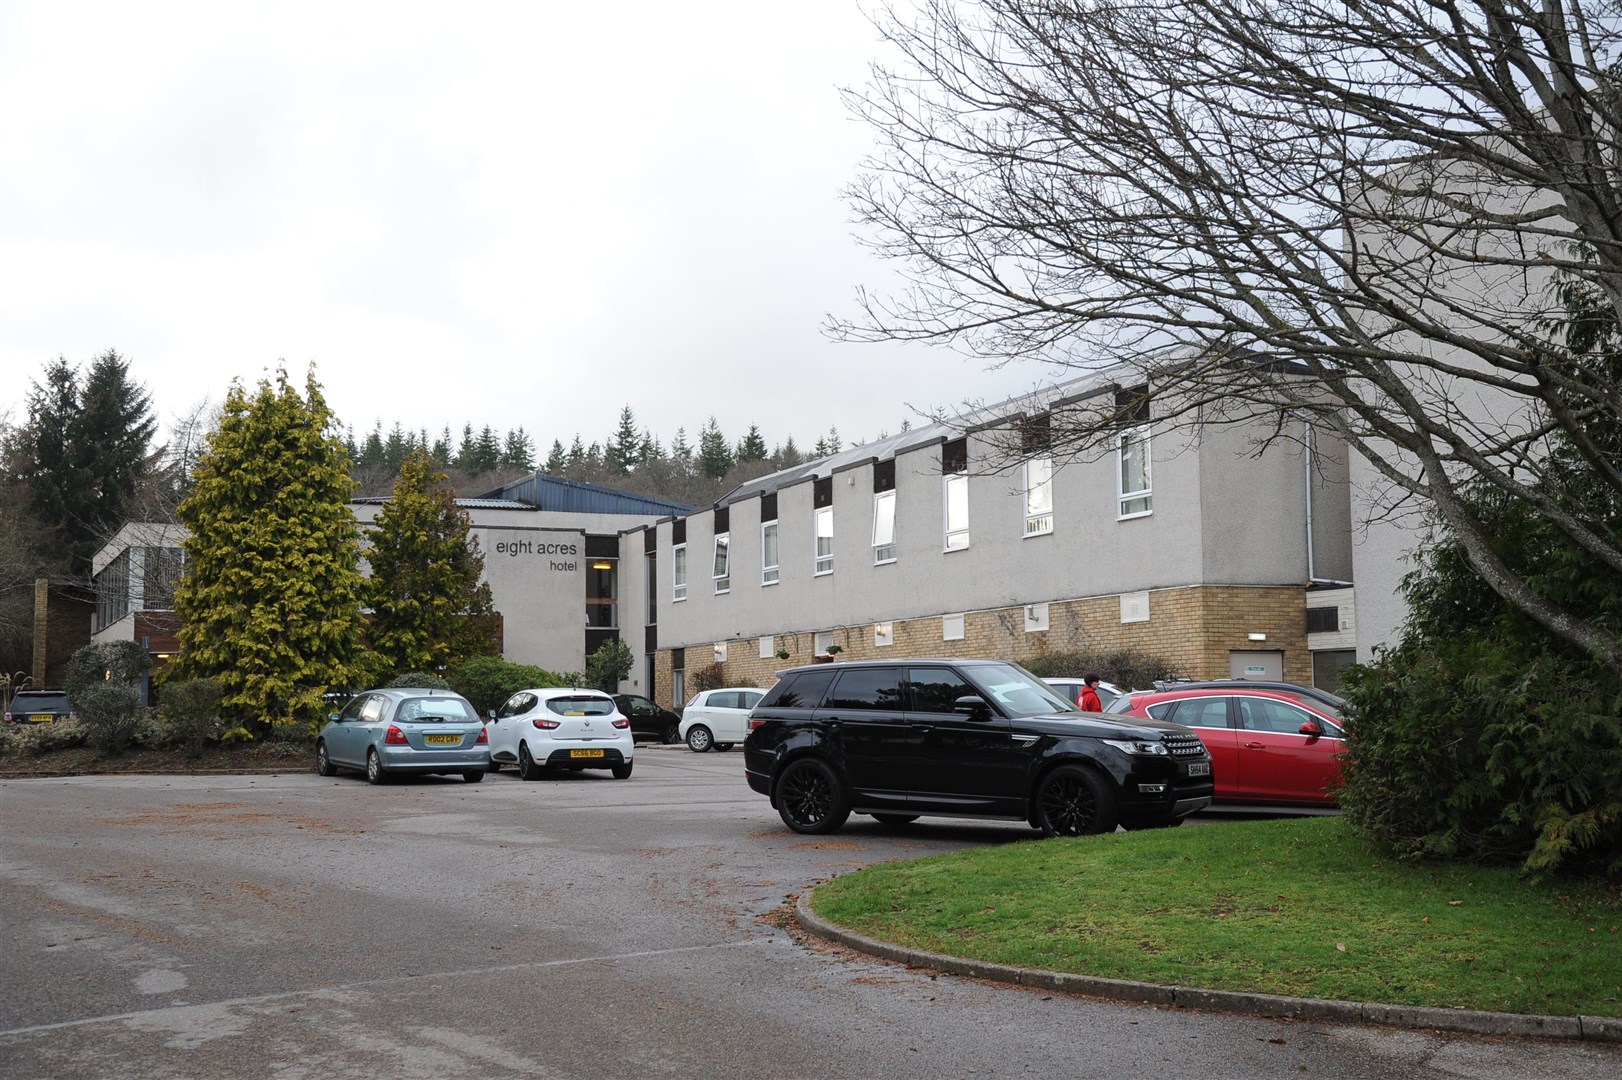 Asylum seekers are being housed in the Eight Acres Hotel. Picture: Eric Cormack